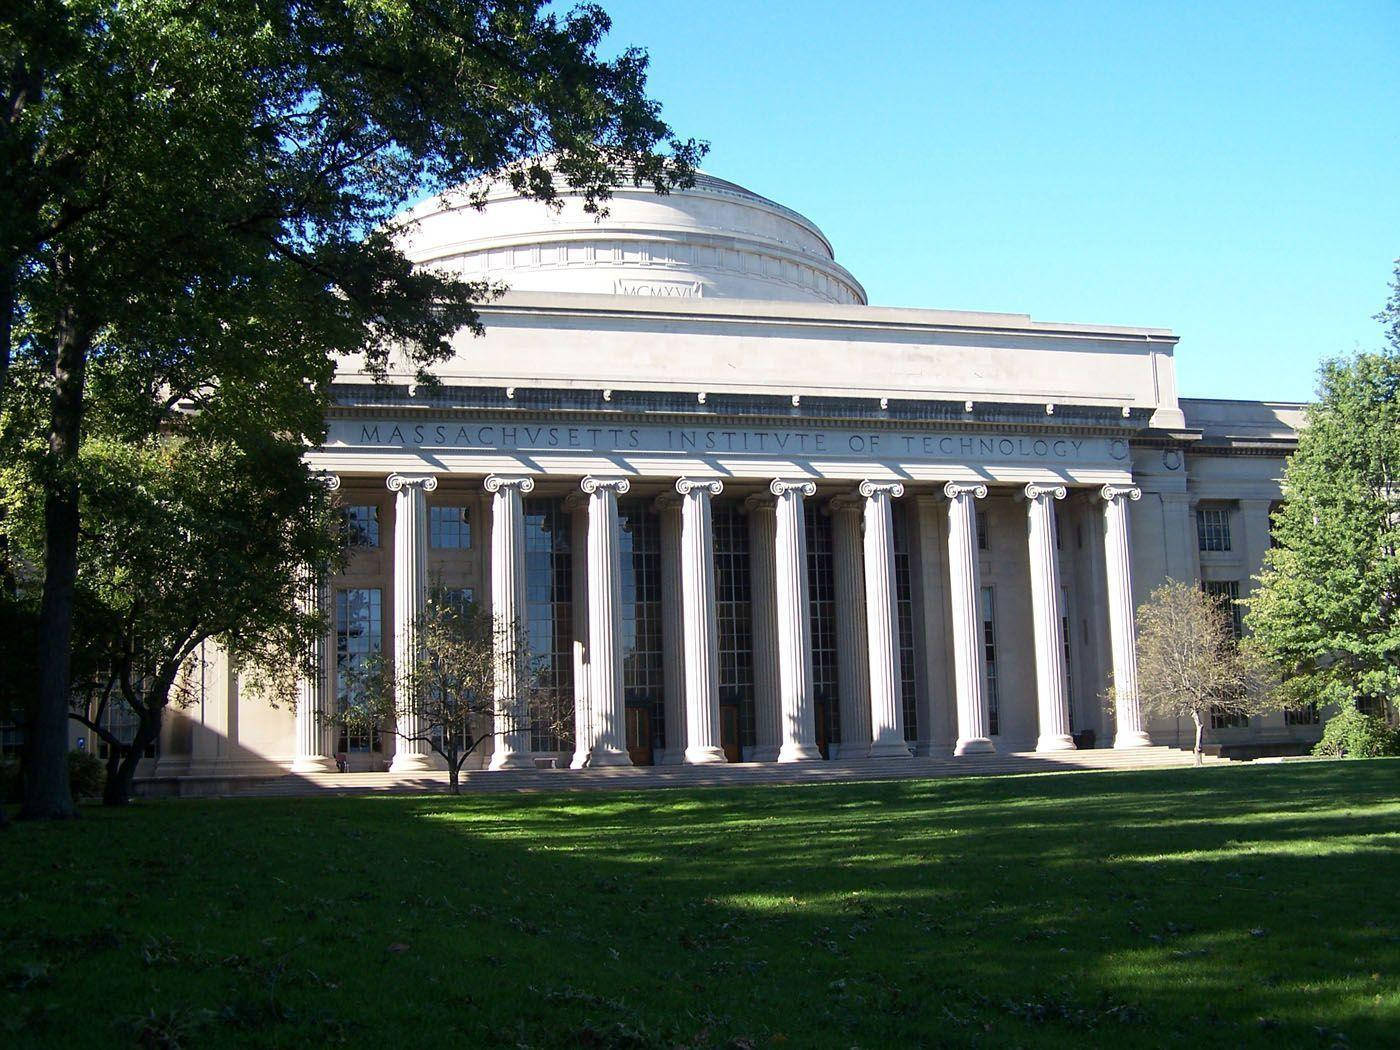 Caption: The Iconic Great Dome of MIT under a Clear Blue Sky Wallpaper